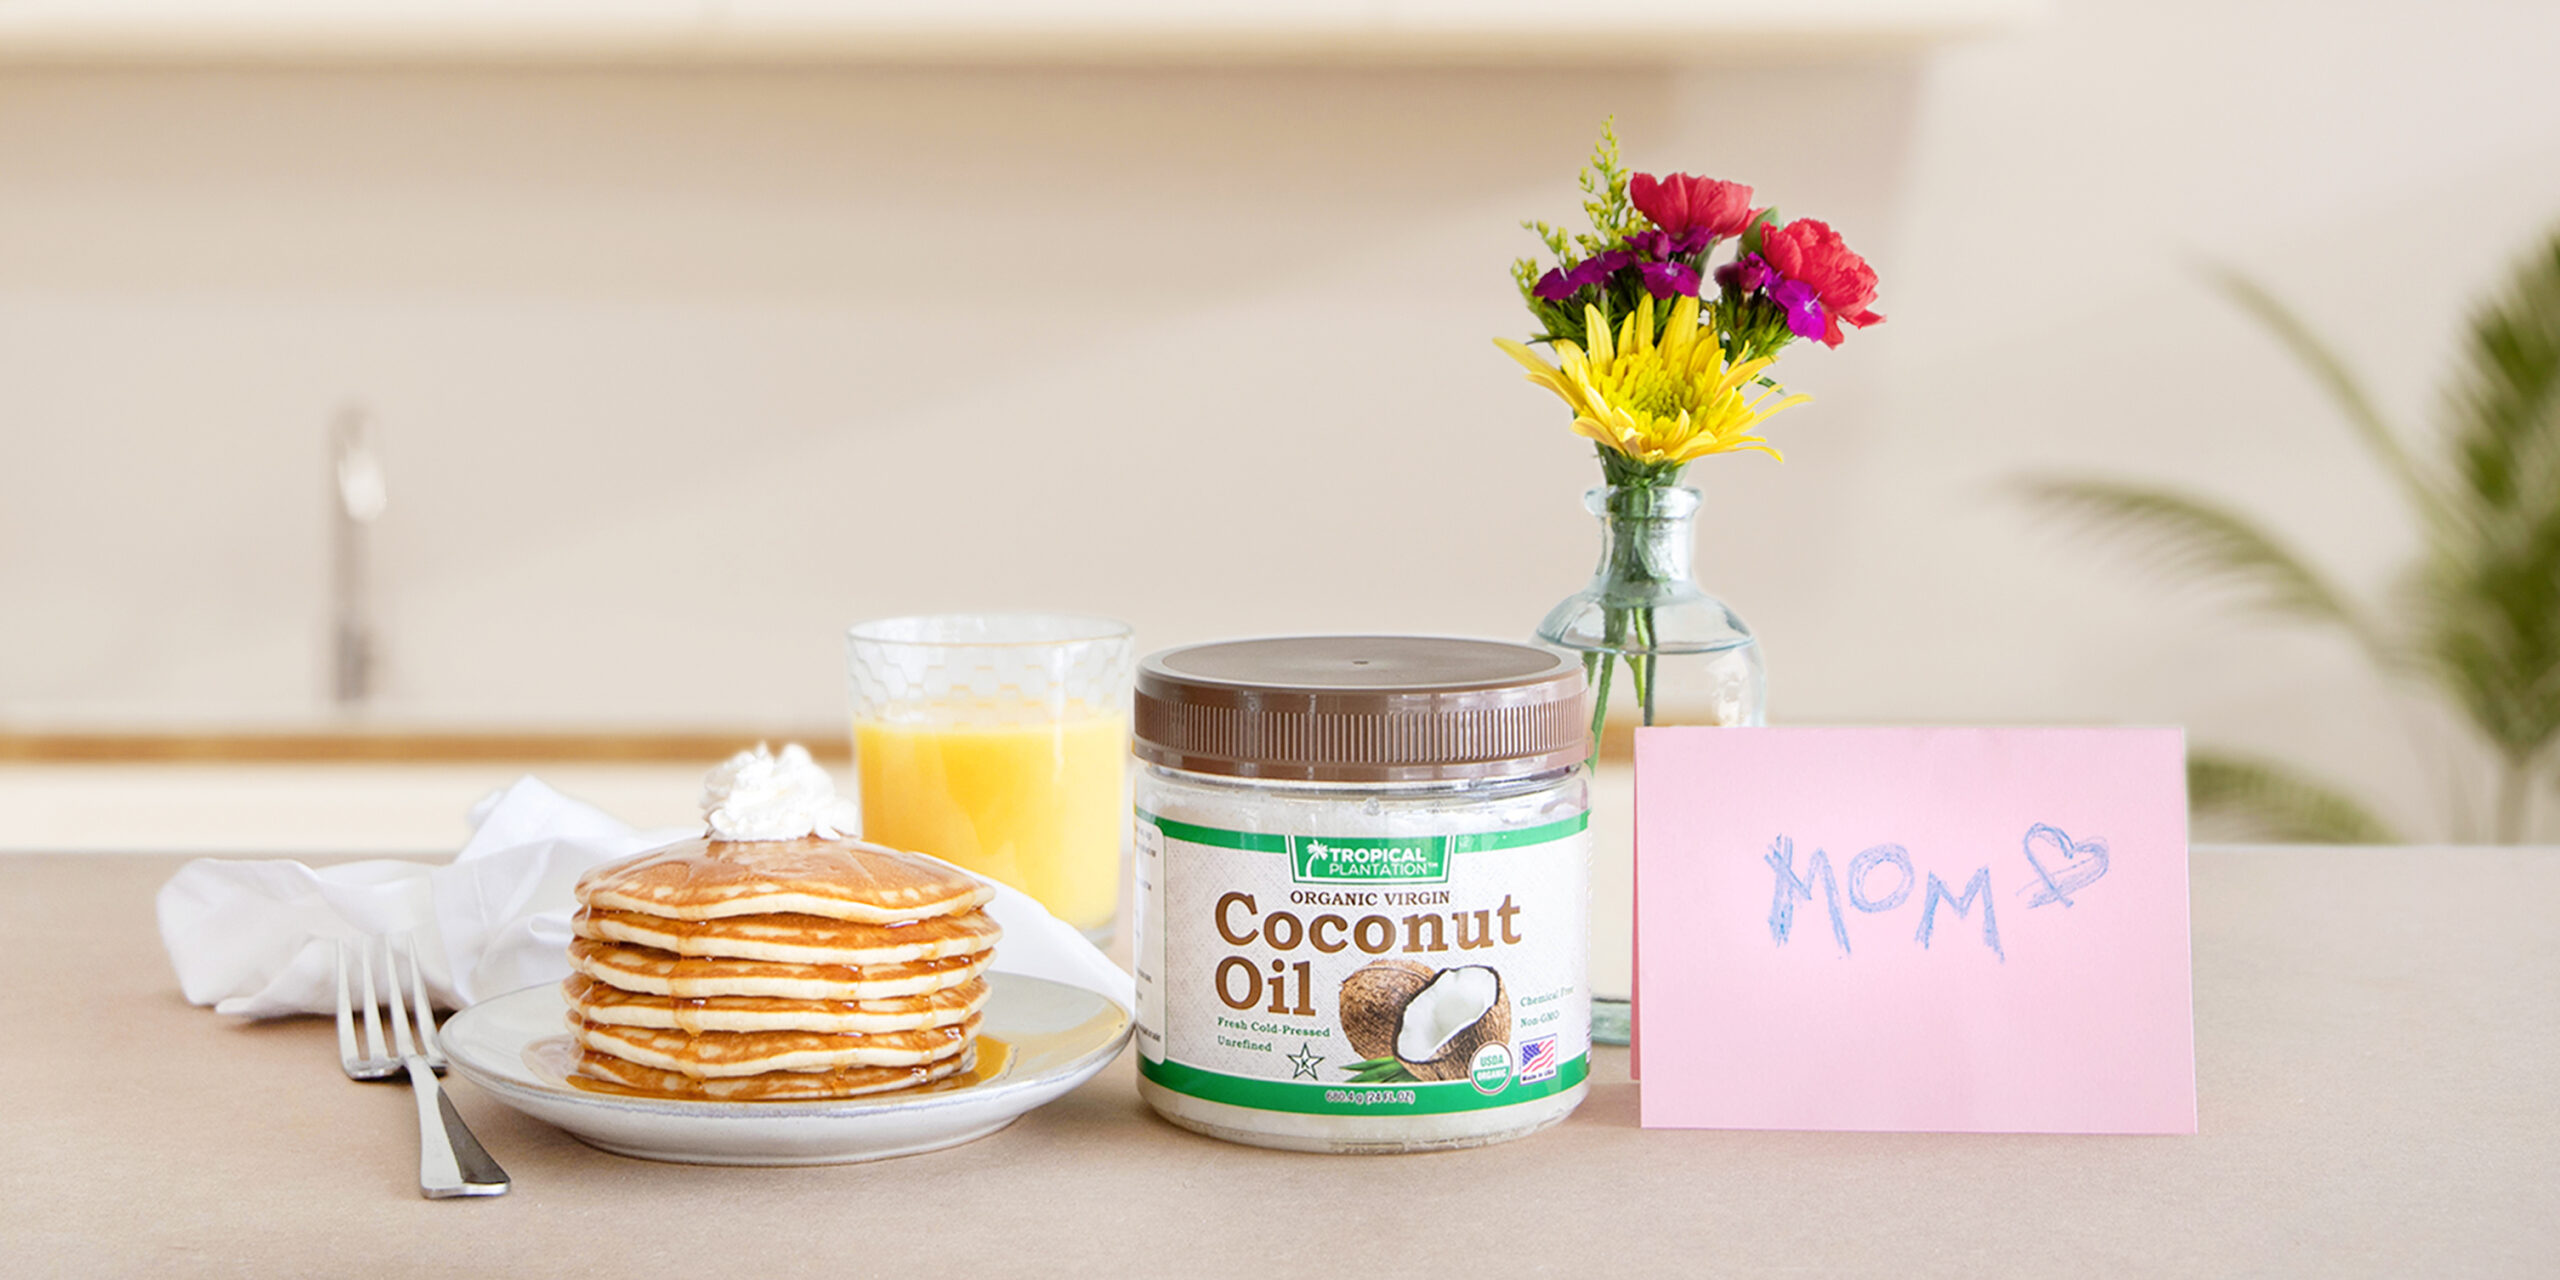 vegan pancakes with coconut oil for mother's day